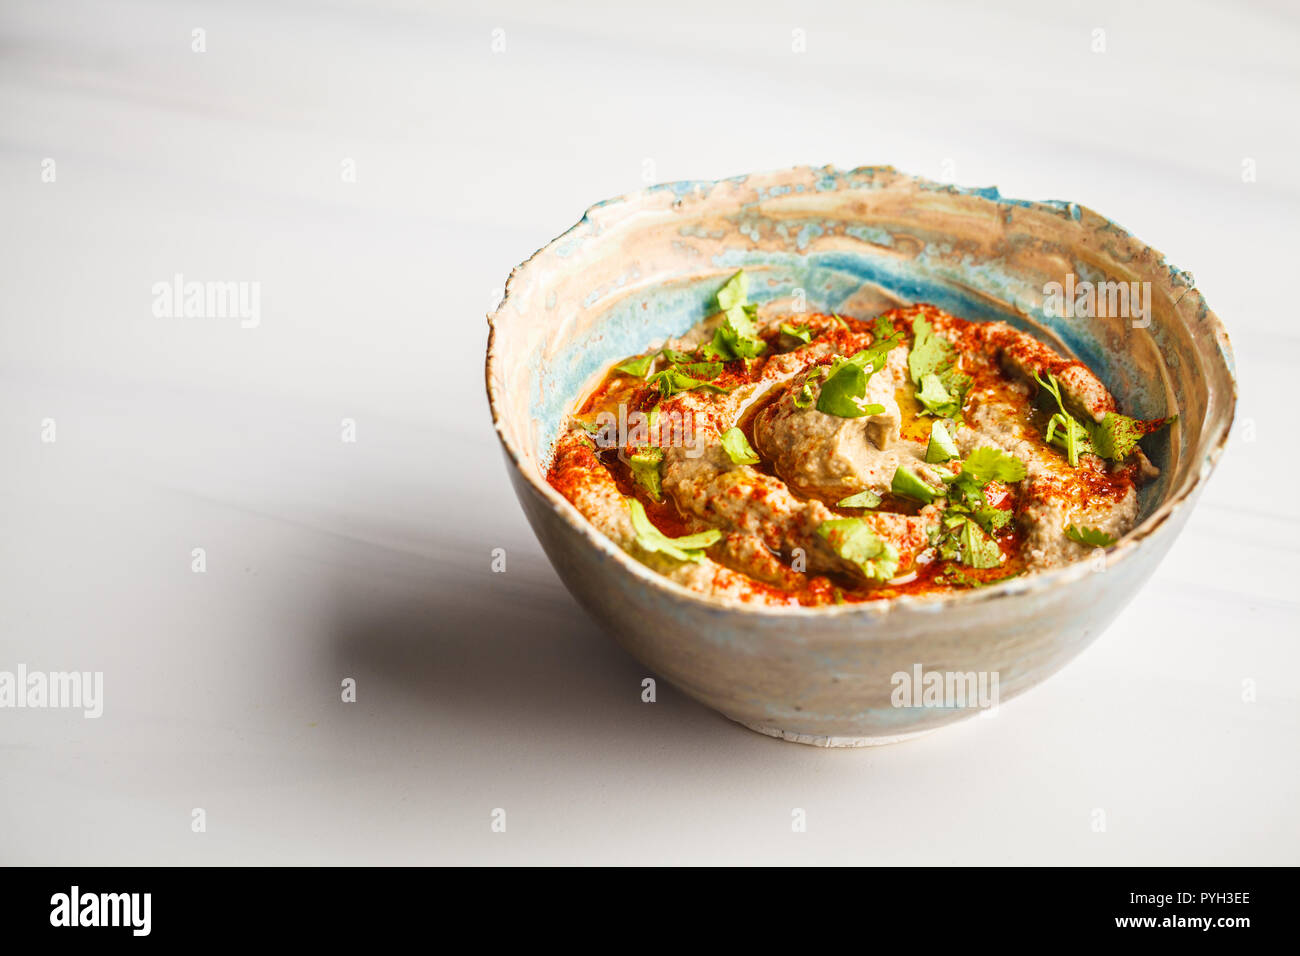 Babaganoush in a plate on white background. Plant based diet, vegan food concept. Stock Photo